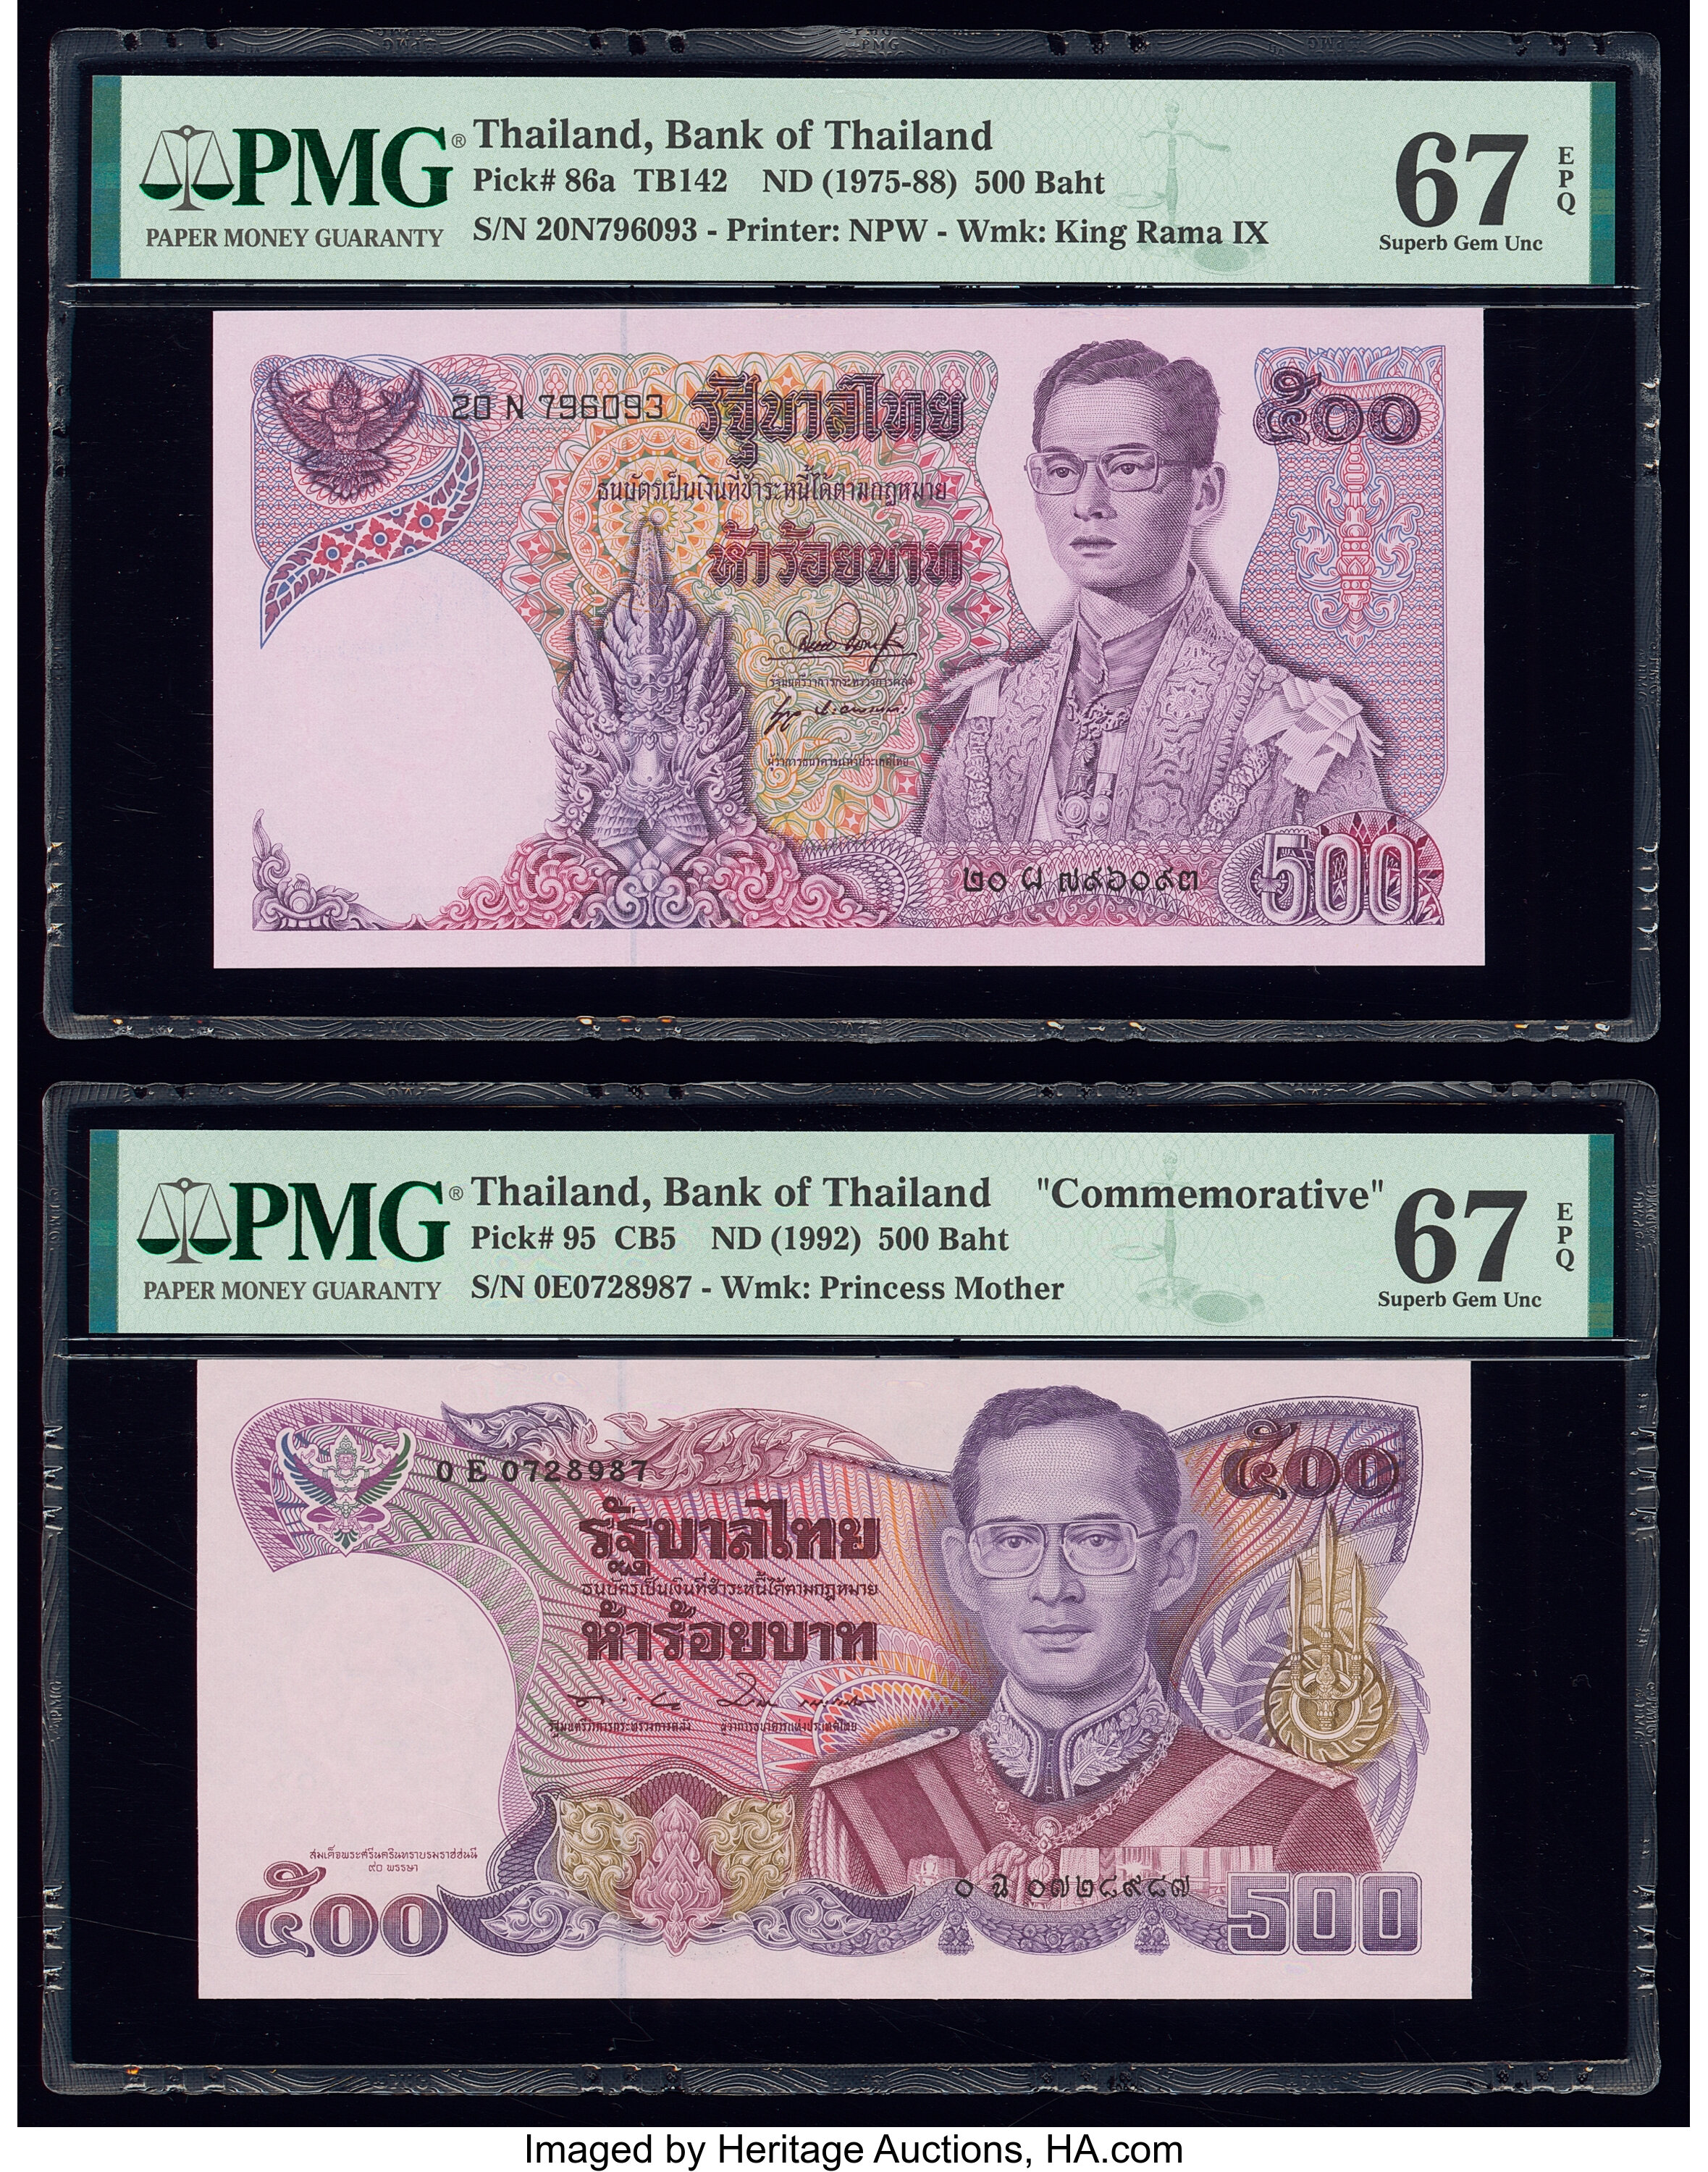 Thailand Bank Note, Government of Thailand, 500 บาท baht , B155d 